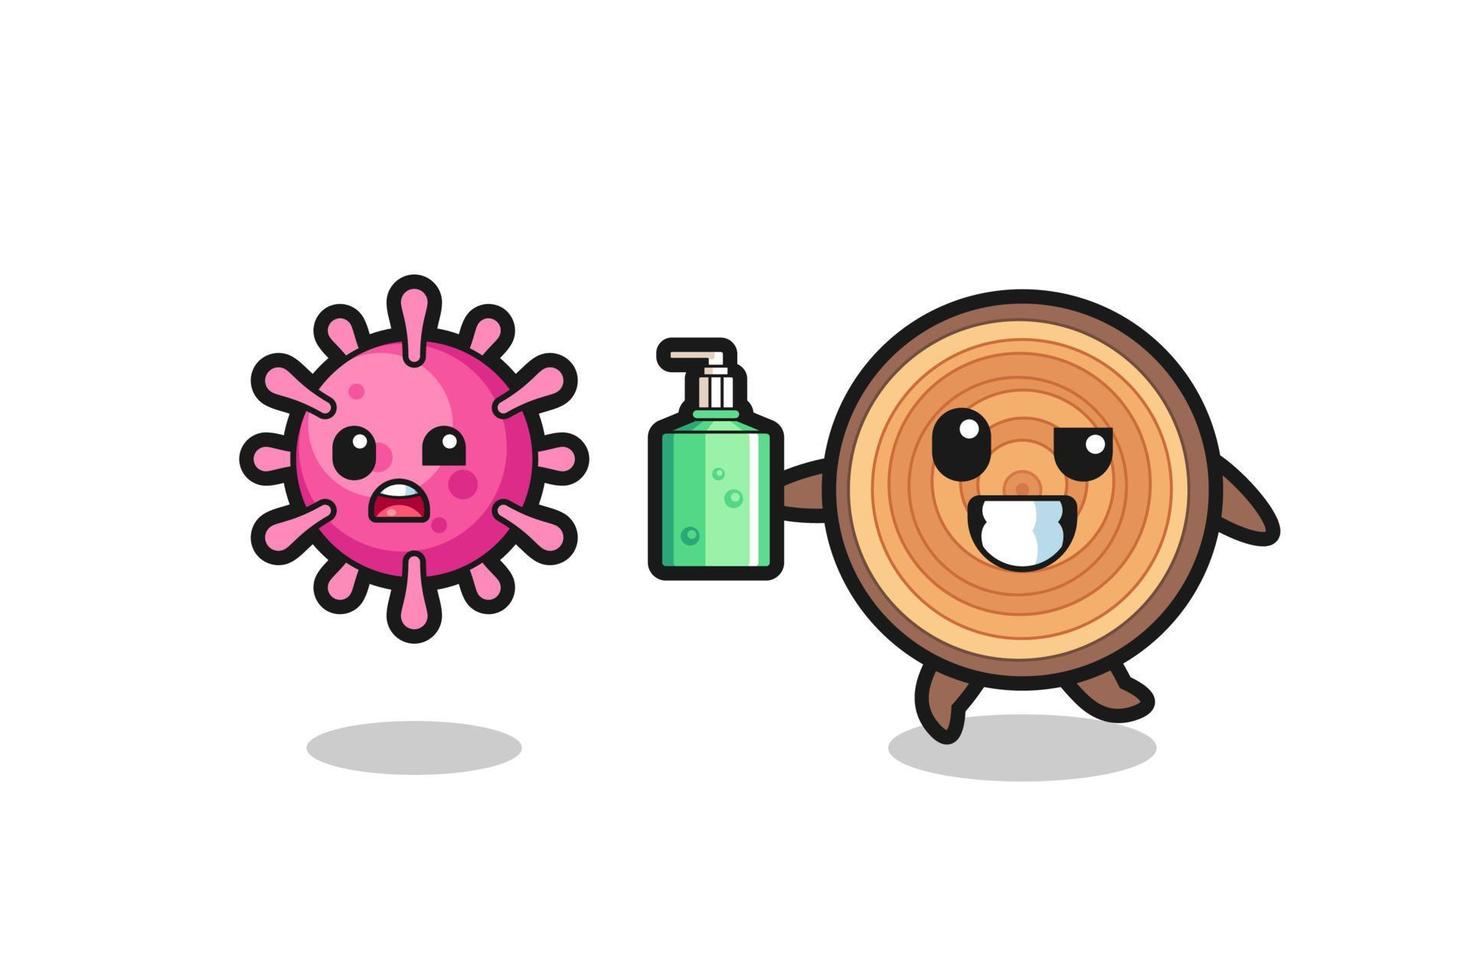 illustration of wood grain character chasing evil virus with hand sanitizer vector